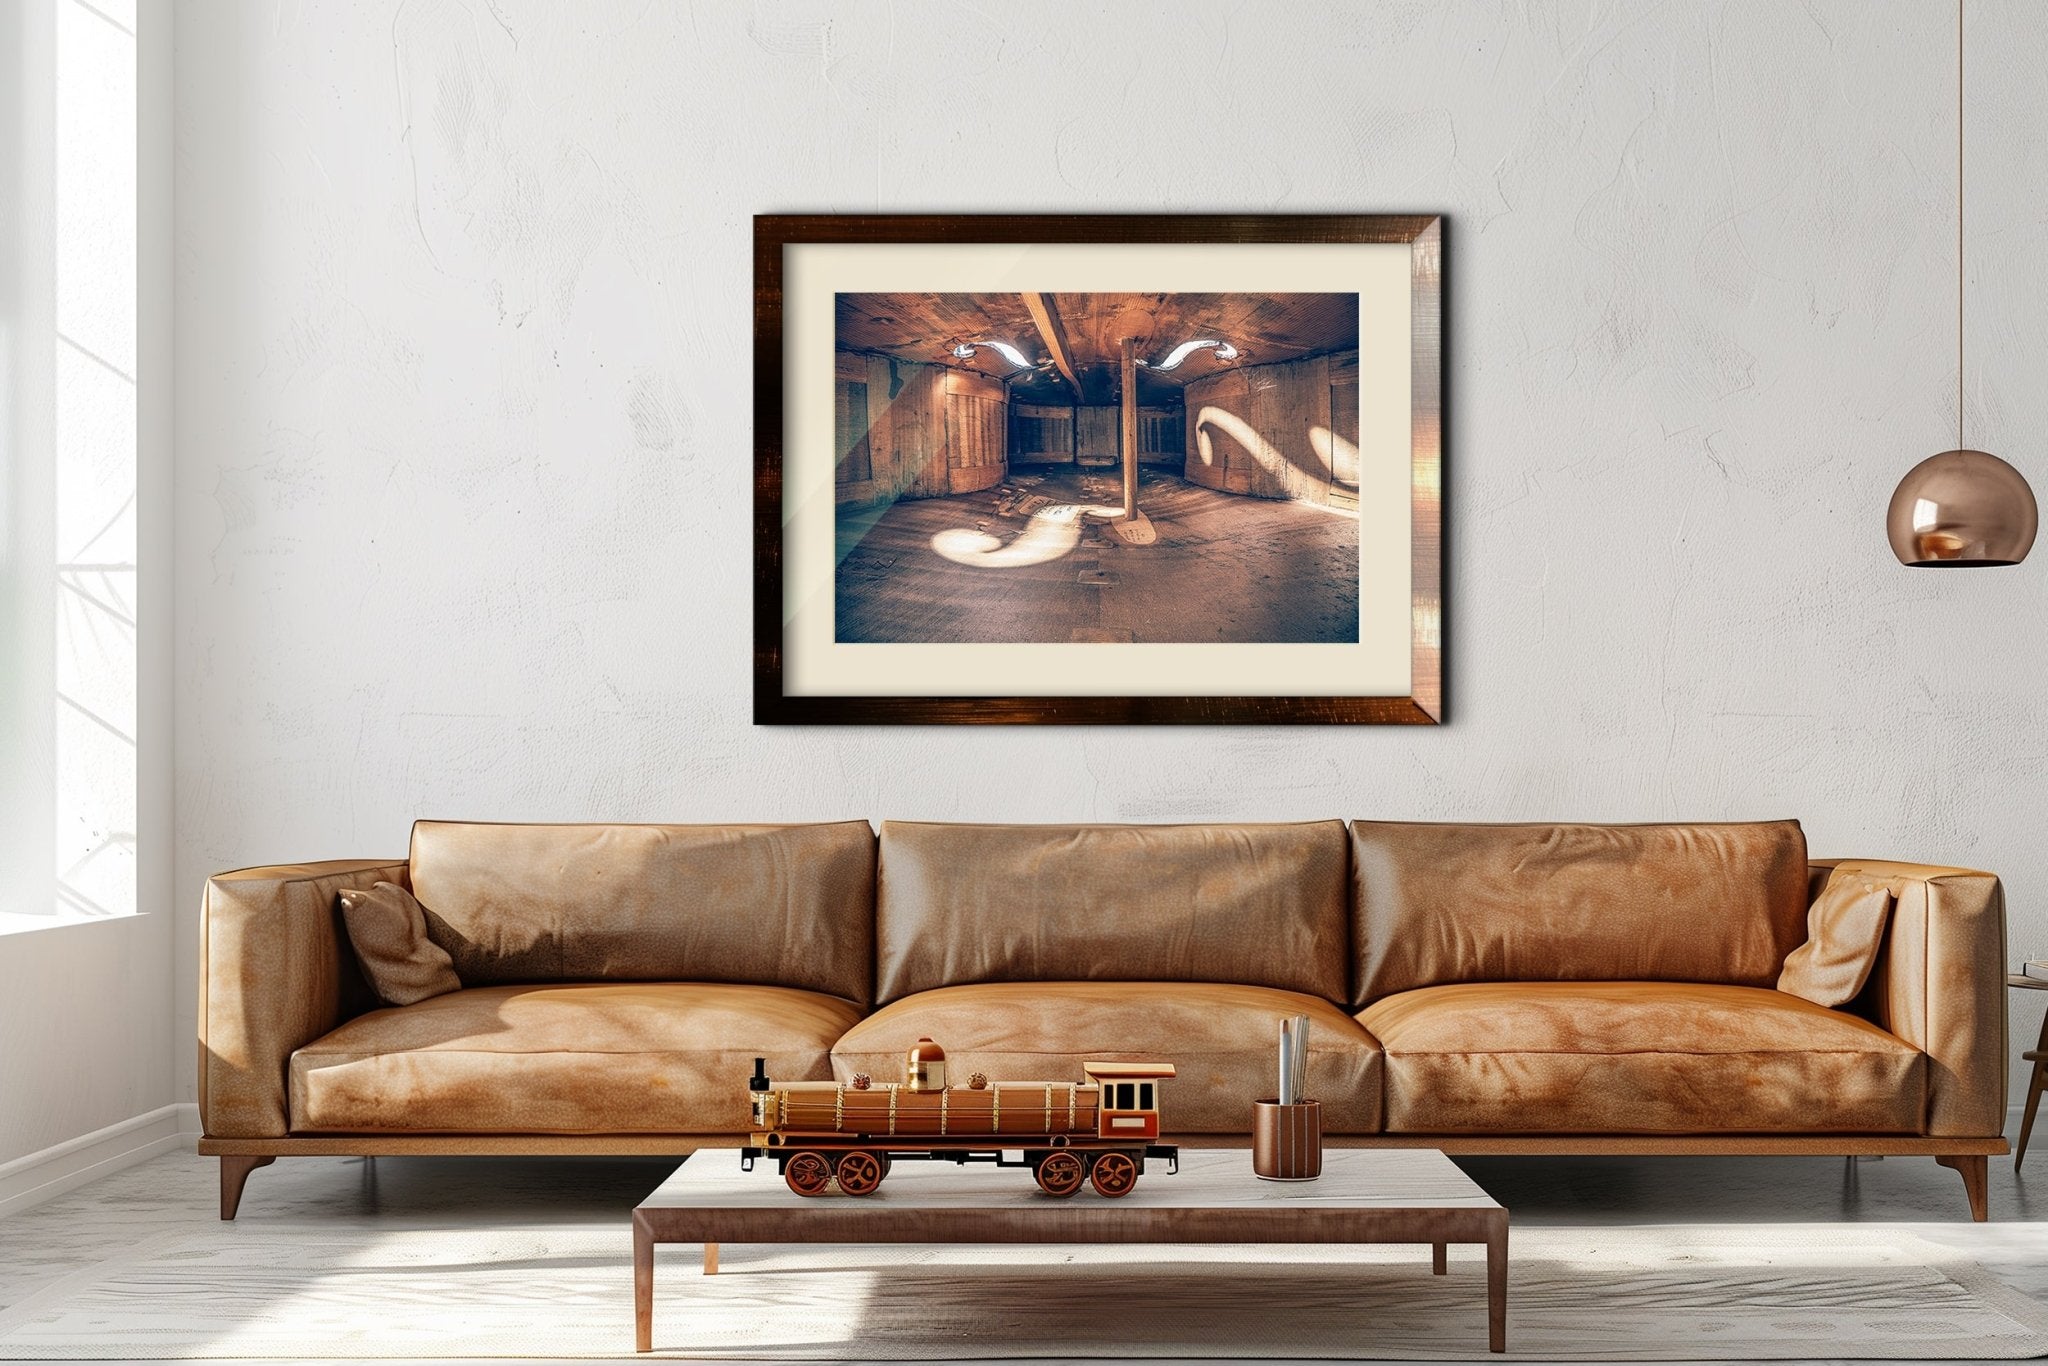 Photo of The Cello Once Hit By a Train. Signed Limited Edition Museum Quality Print. - Giclée Museum Quality Print - Architecture In Music